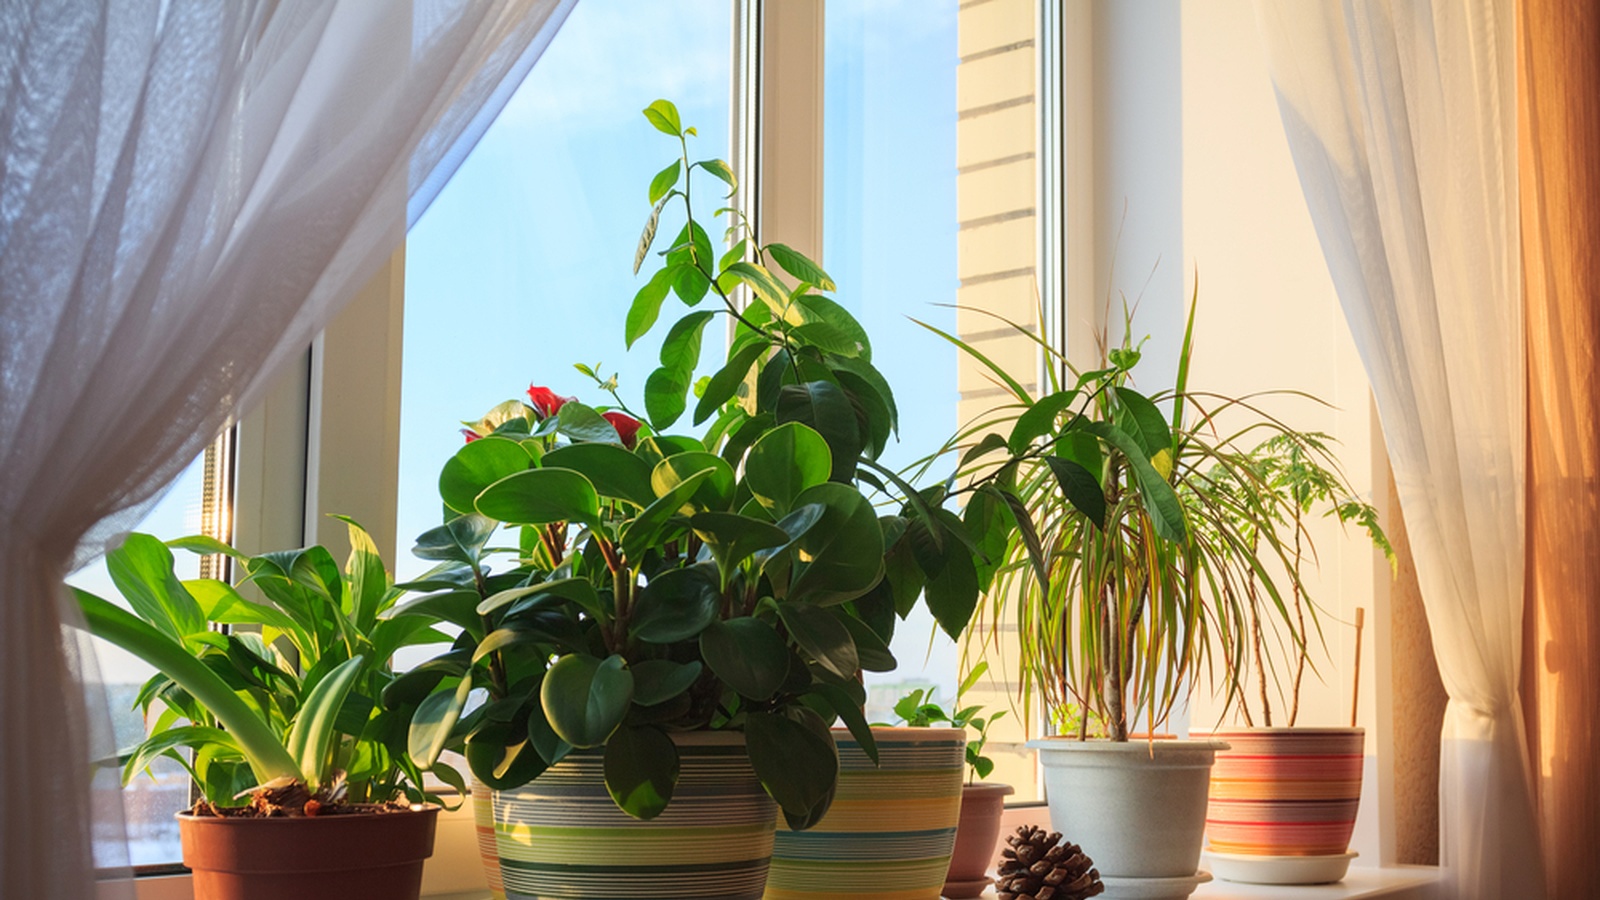 4 Plants To Have In Your Home To Make You Happier